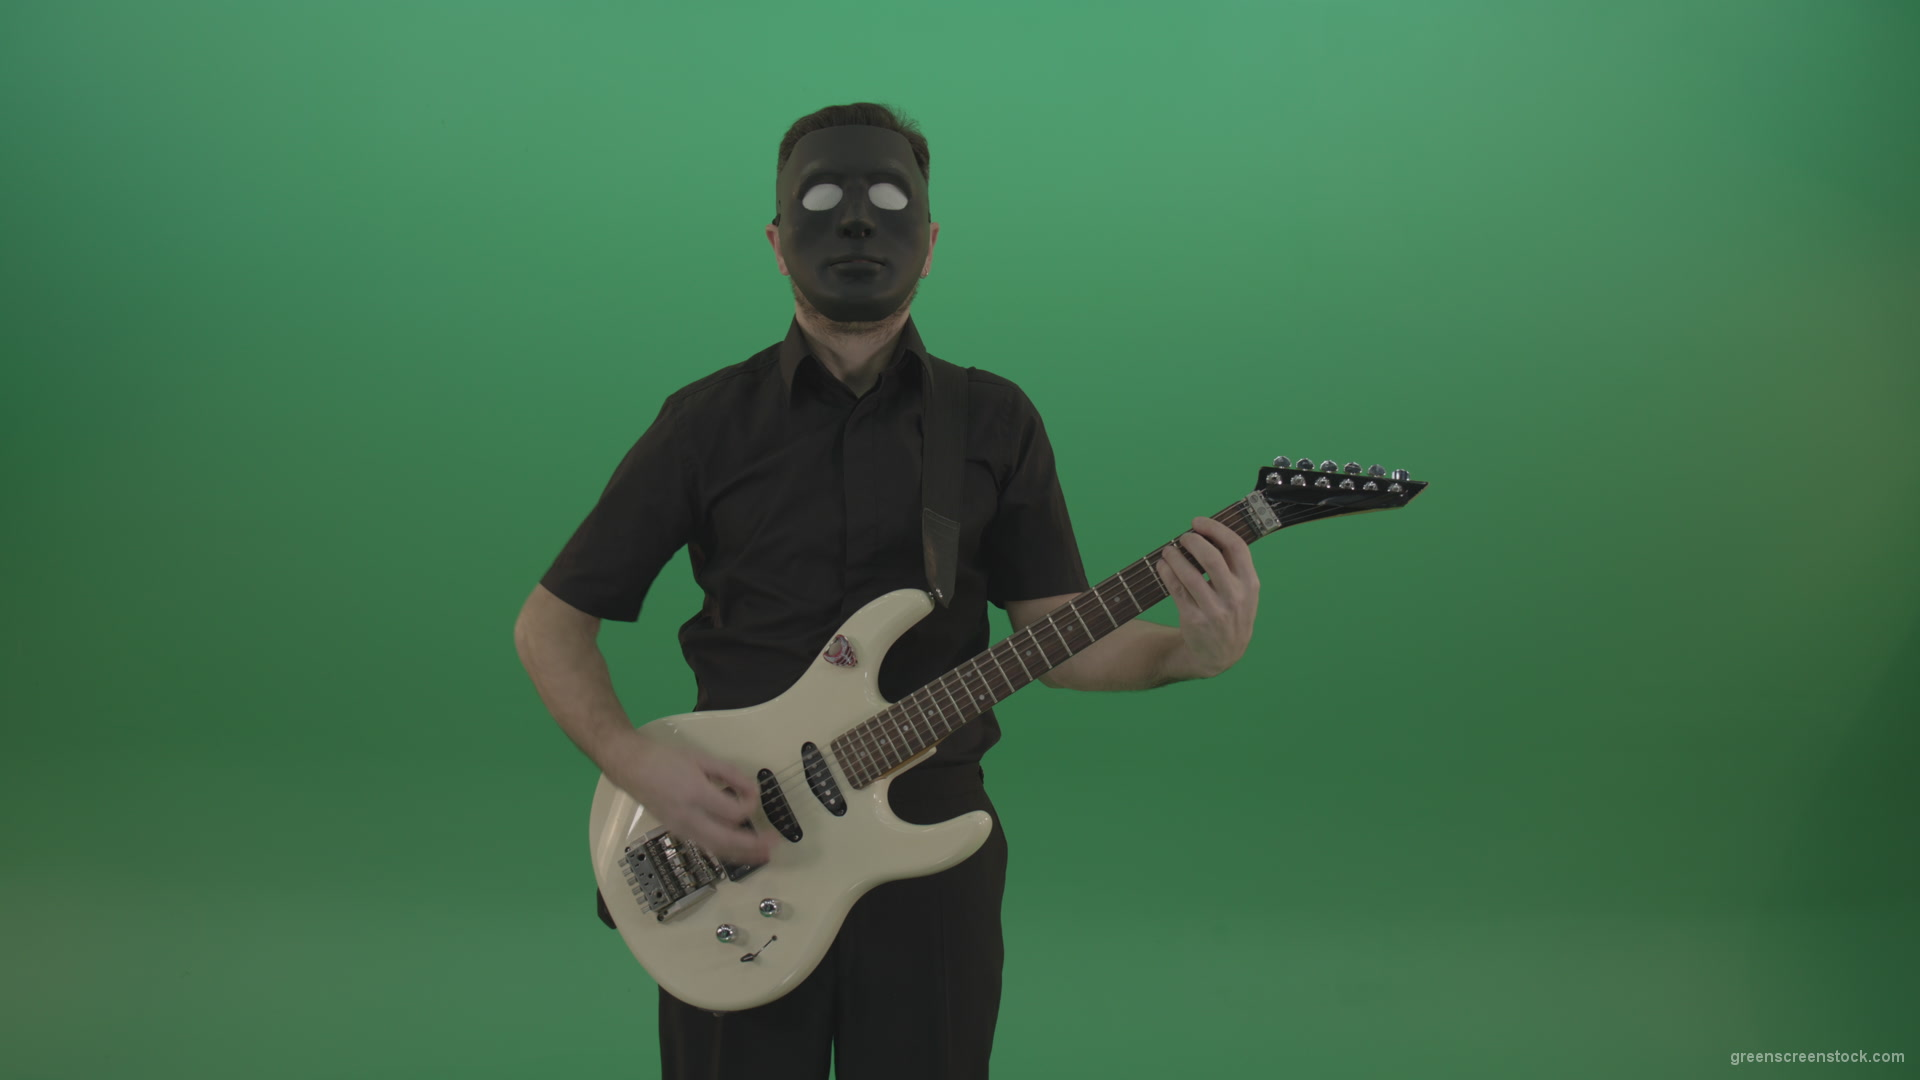 Hard-rock-guitarist-man-playing-white-guitar-in-black-mask-isolated-on-green-background_005 Green Screen Stock